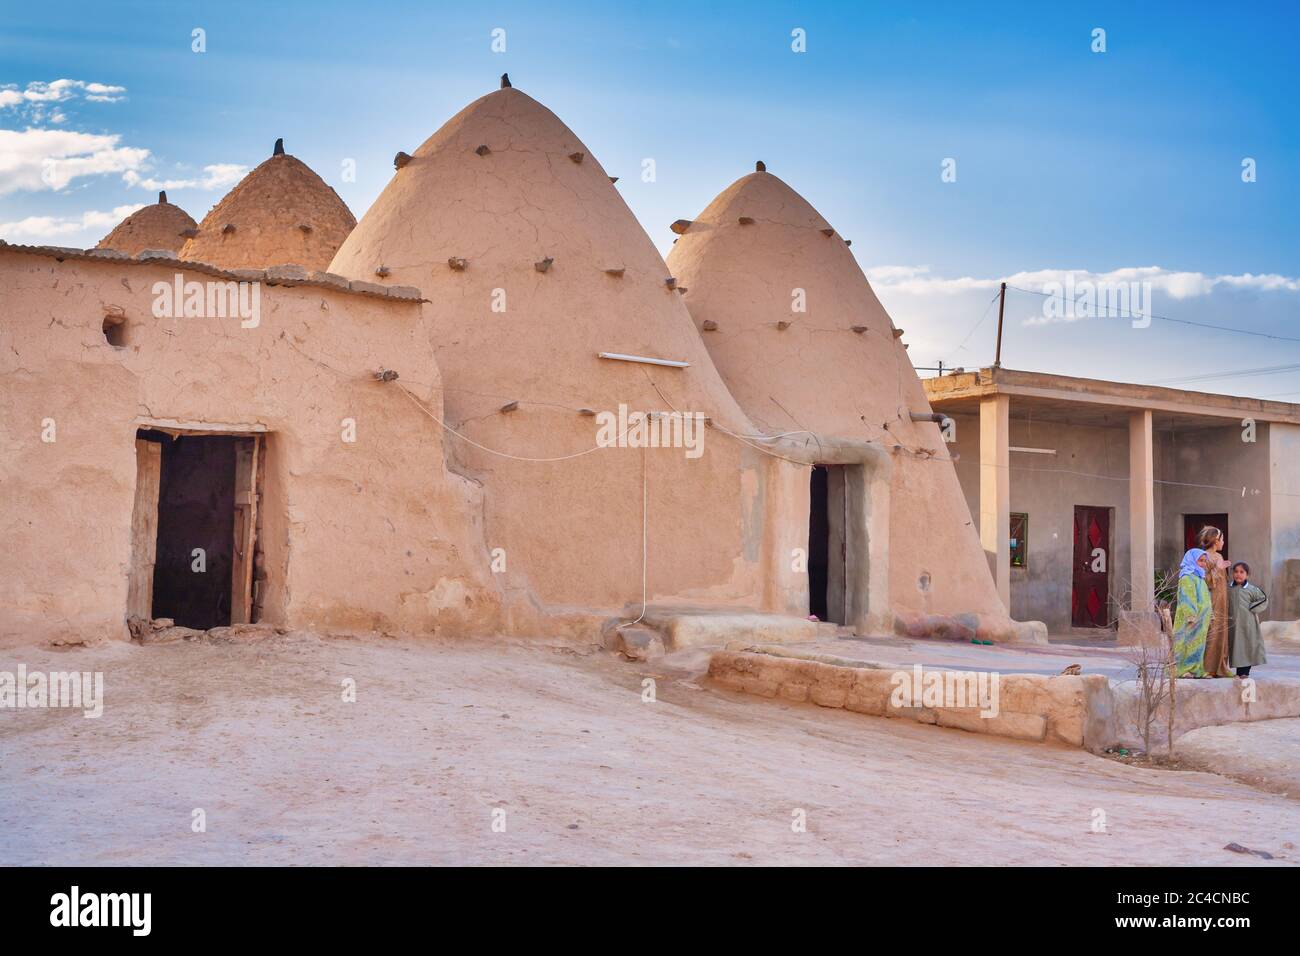 Village with traditional beehive house built of brick and mud, Srouj village, Syria Stock Photo